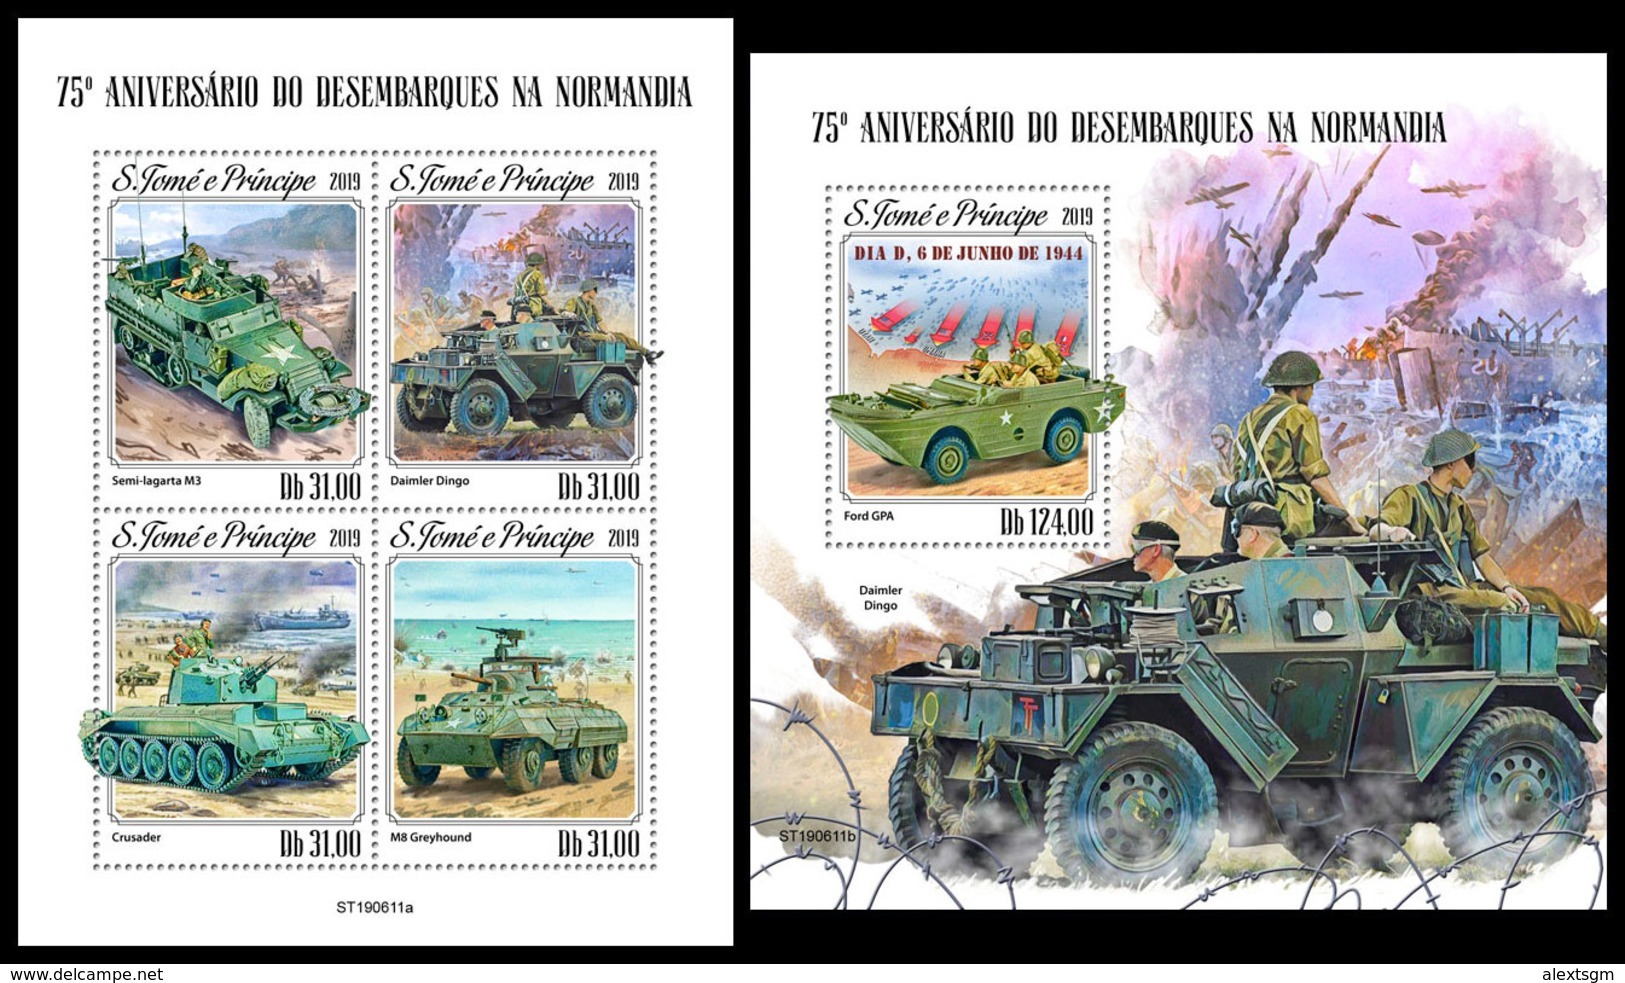 S. TOME & PRINCIPE 2019 - World War 2: Normandy. M/S + S/S Official Issue [ST190611] - Sao Tome And Principe